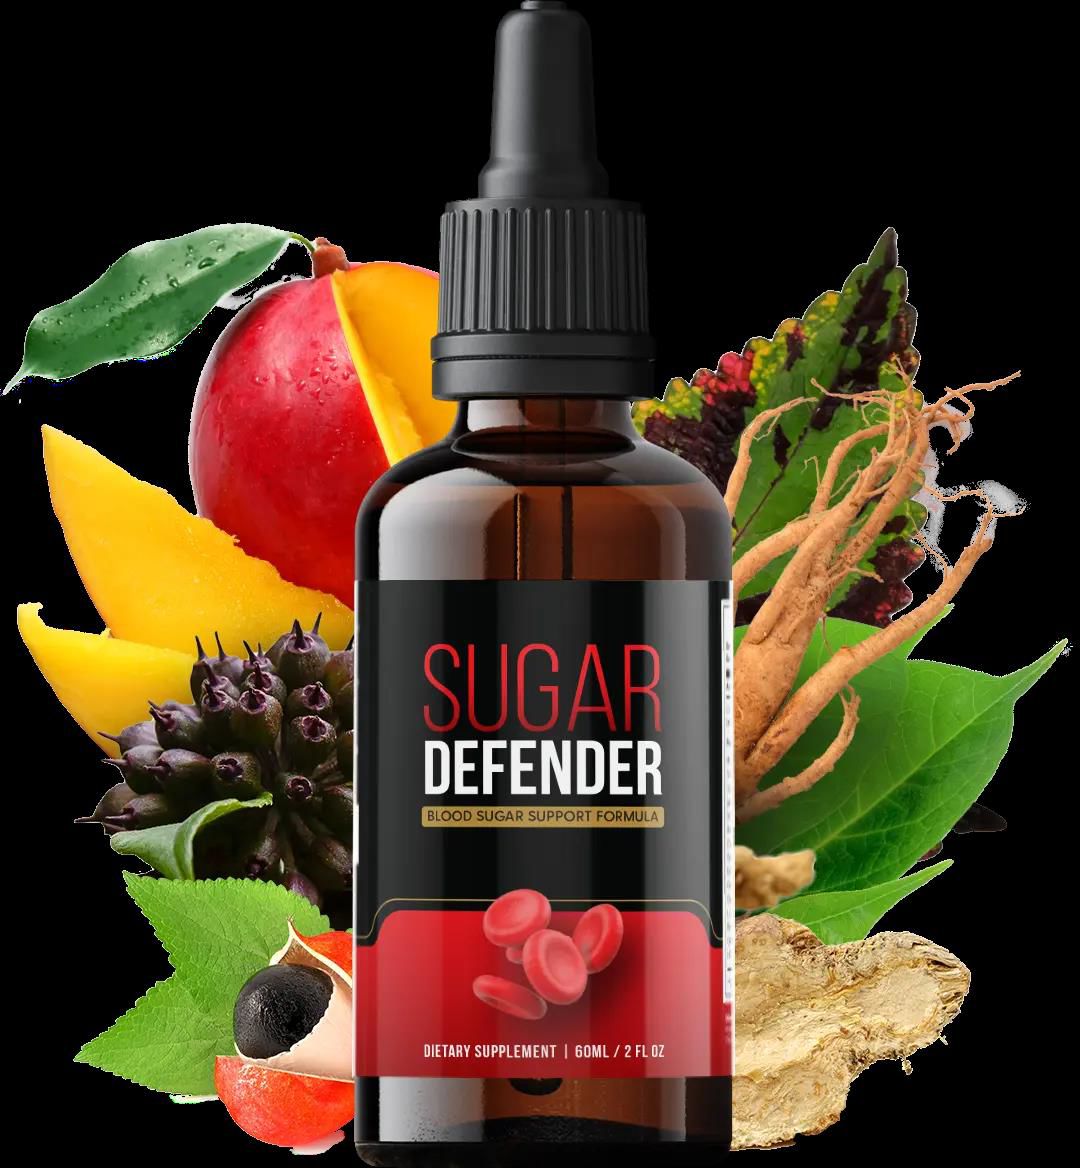 Sugar Defender Review: Real Results or Just A Hype?